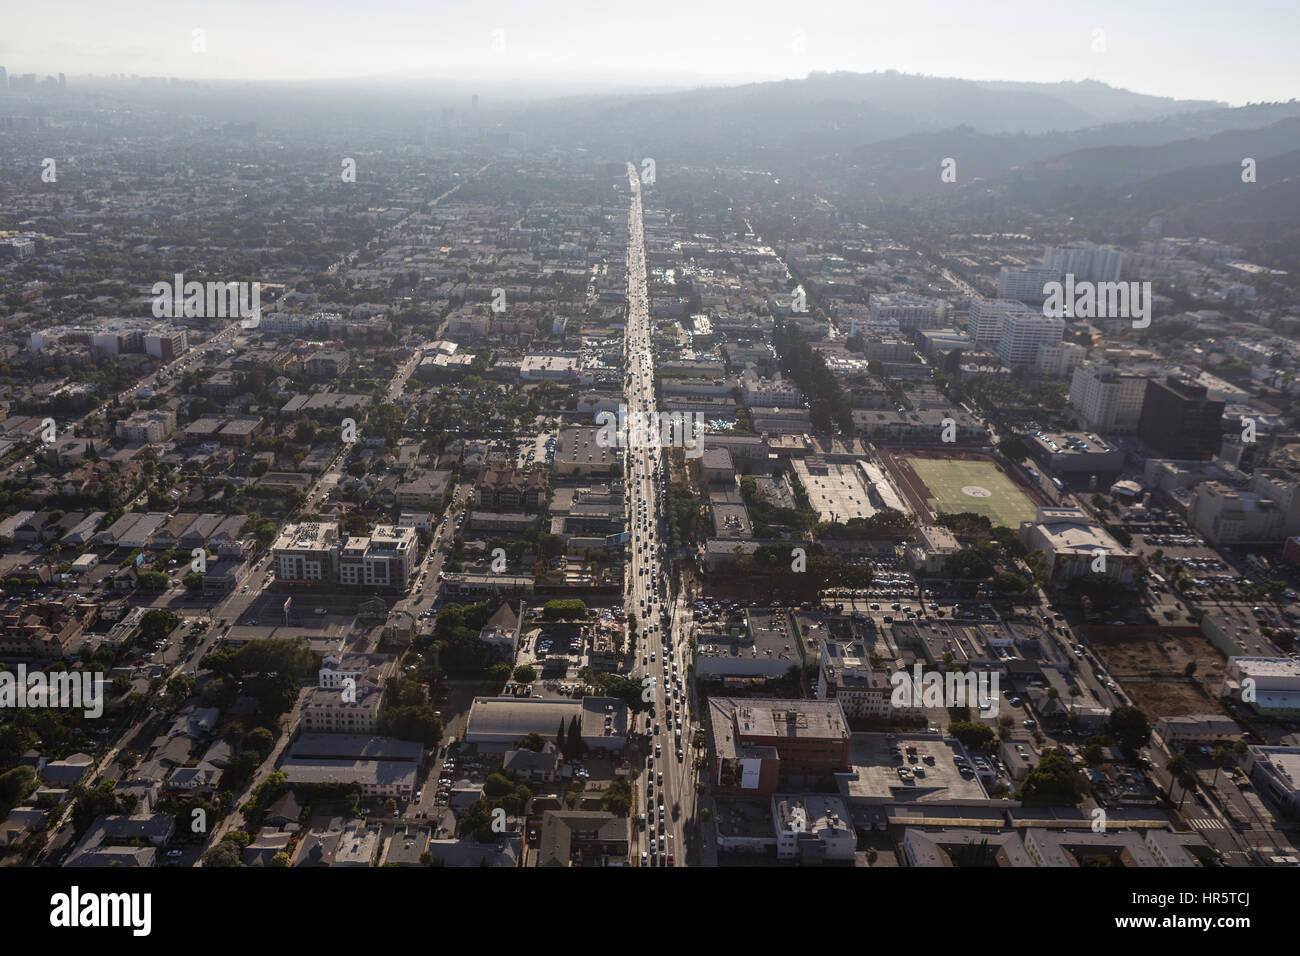 Los Angeles, California, USA - August 6, 2016:  Aerial view of thick summer smog over Sunset Blvd in Hollywood. Stock Photo